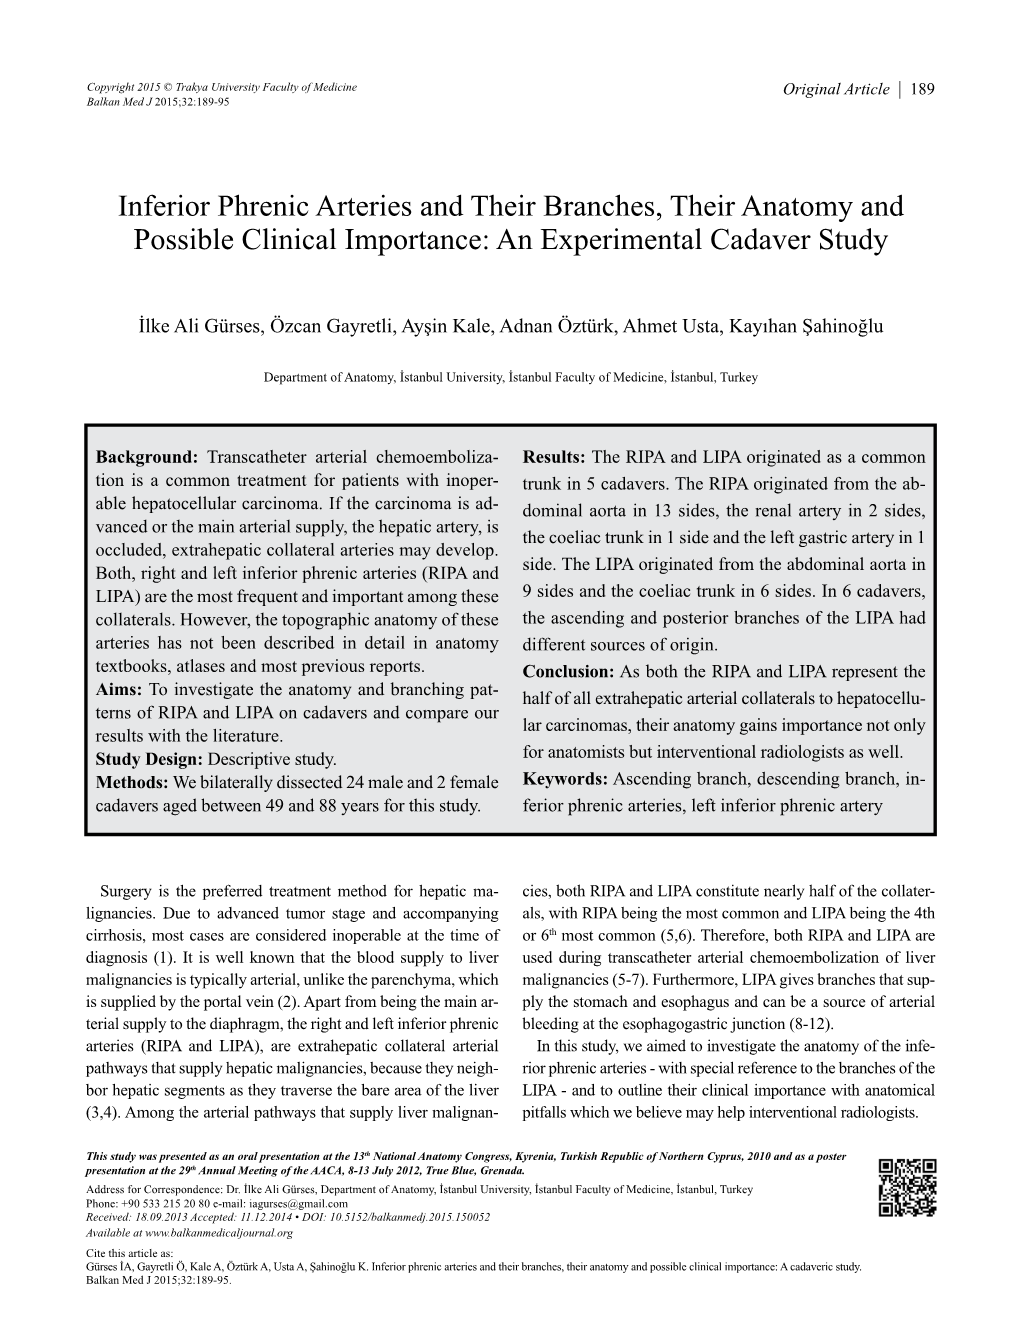 Inferior Phrenic Arteries and Their Branches, Their Anatomy and Possible Clinical Importance: an Experimental Cadaver Study